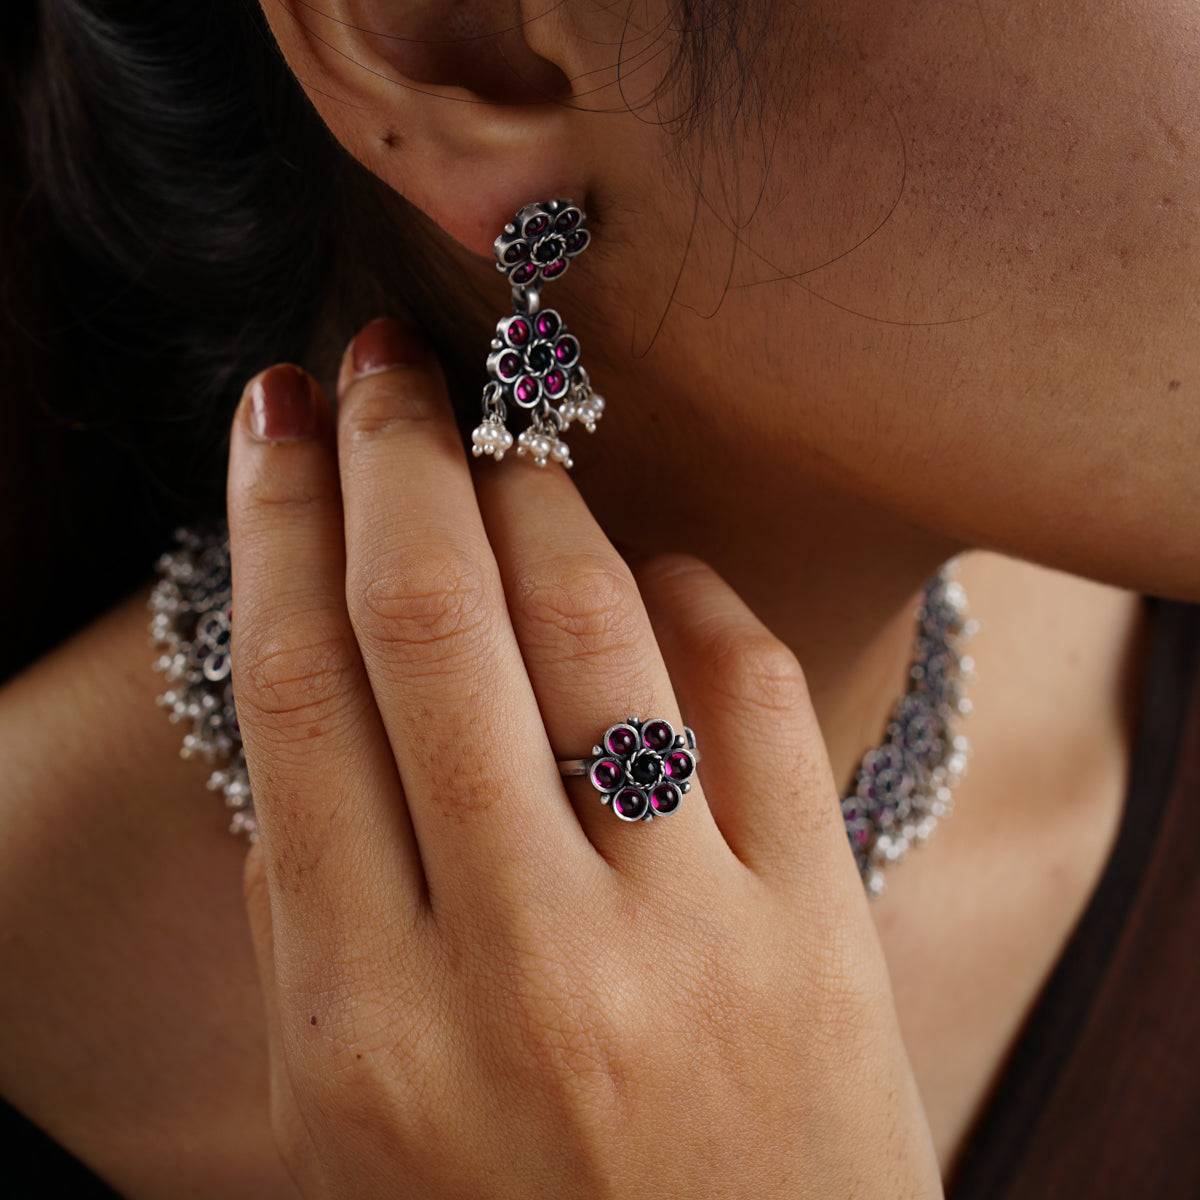 a close up of a person wearing a ring and earrings